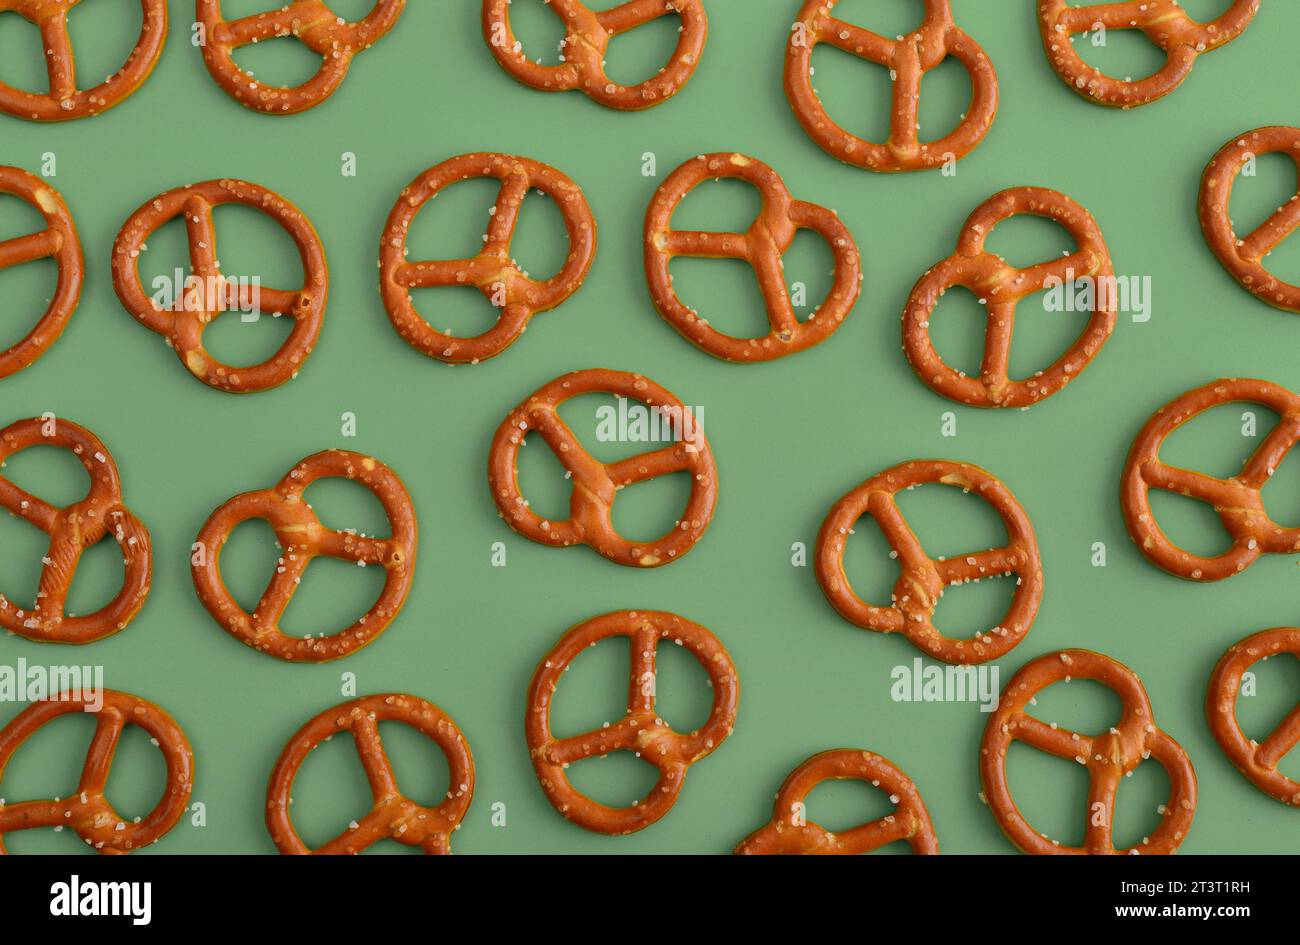 Mini pretzels with sesame seeds as pattern on green background, top view Stock Photo